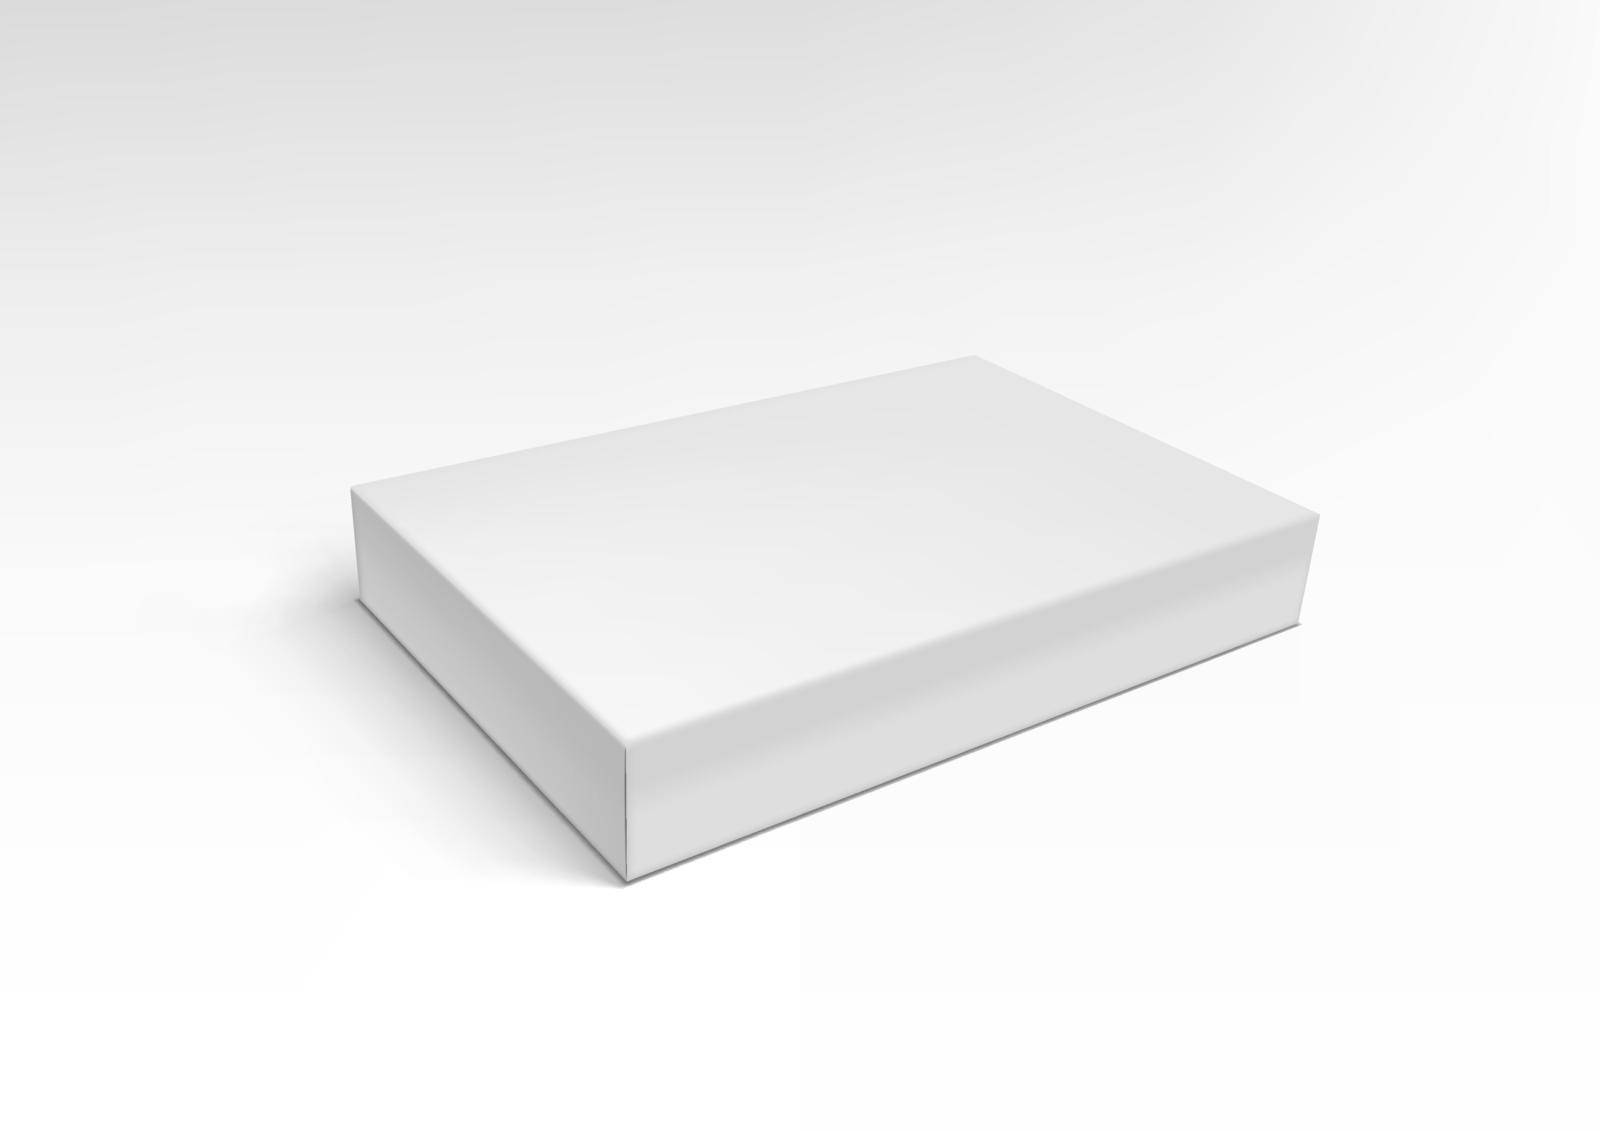 White Slim Pasteboard Box Isolated On White by VectorThings